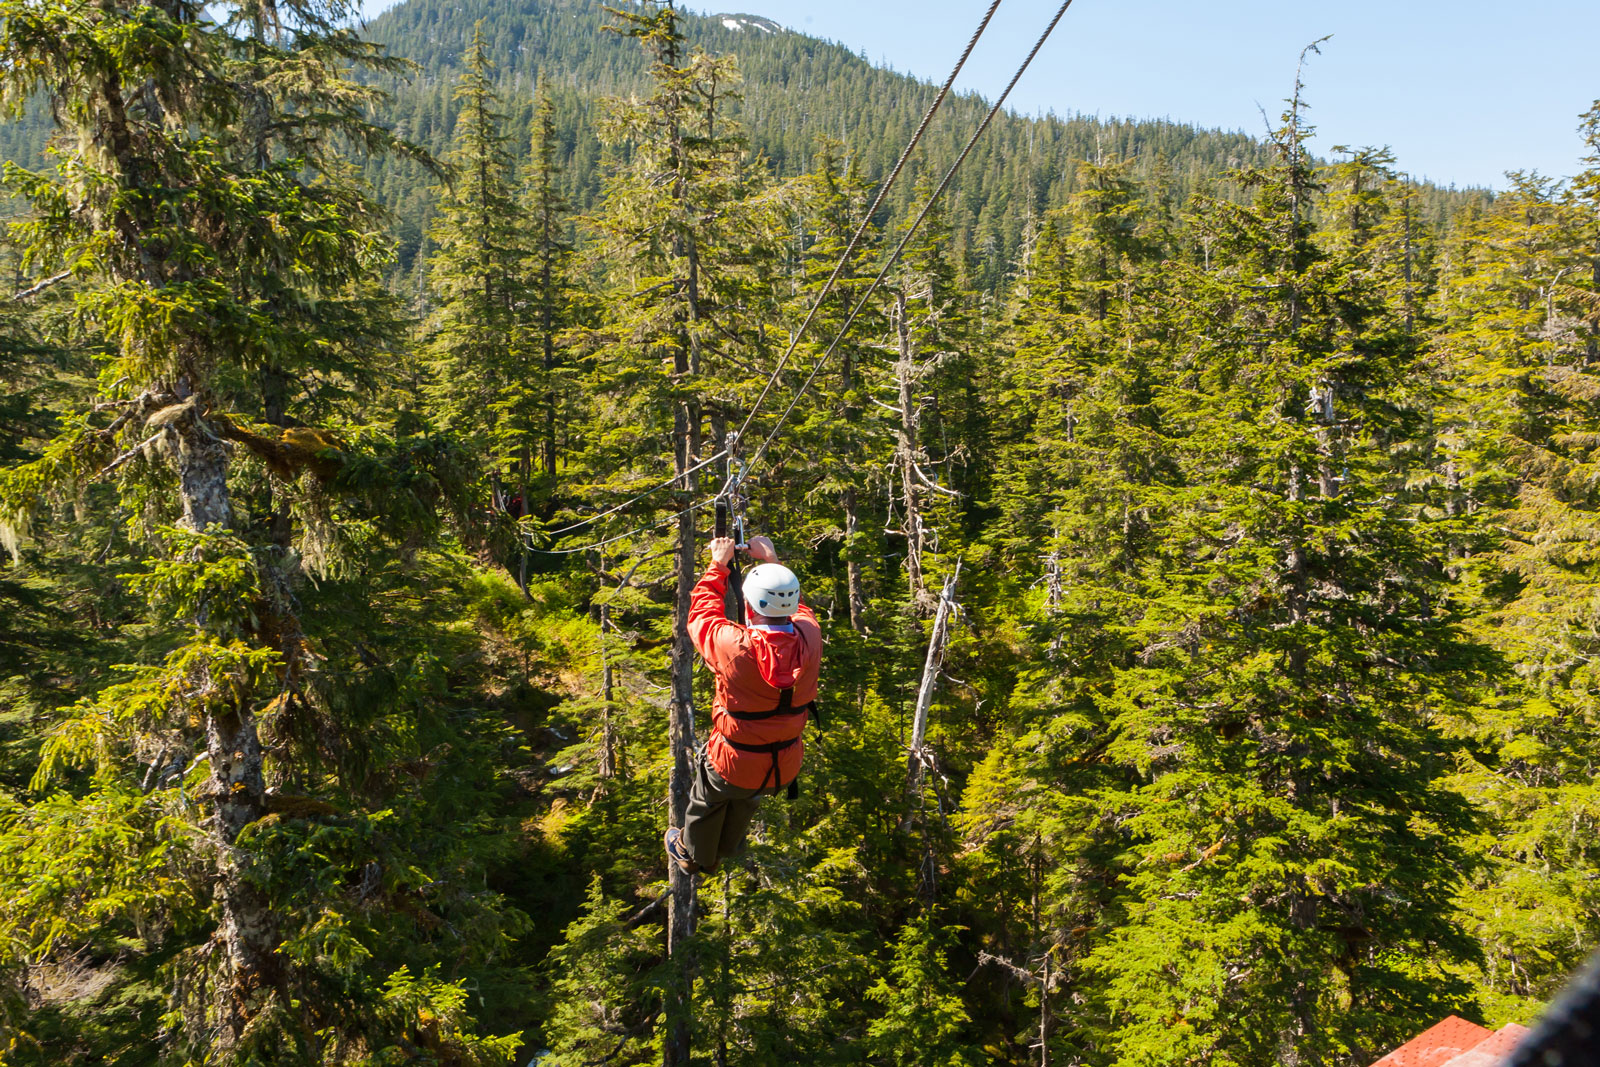 What’s It Like to Be a Zip Line Tour Guide?